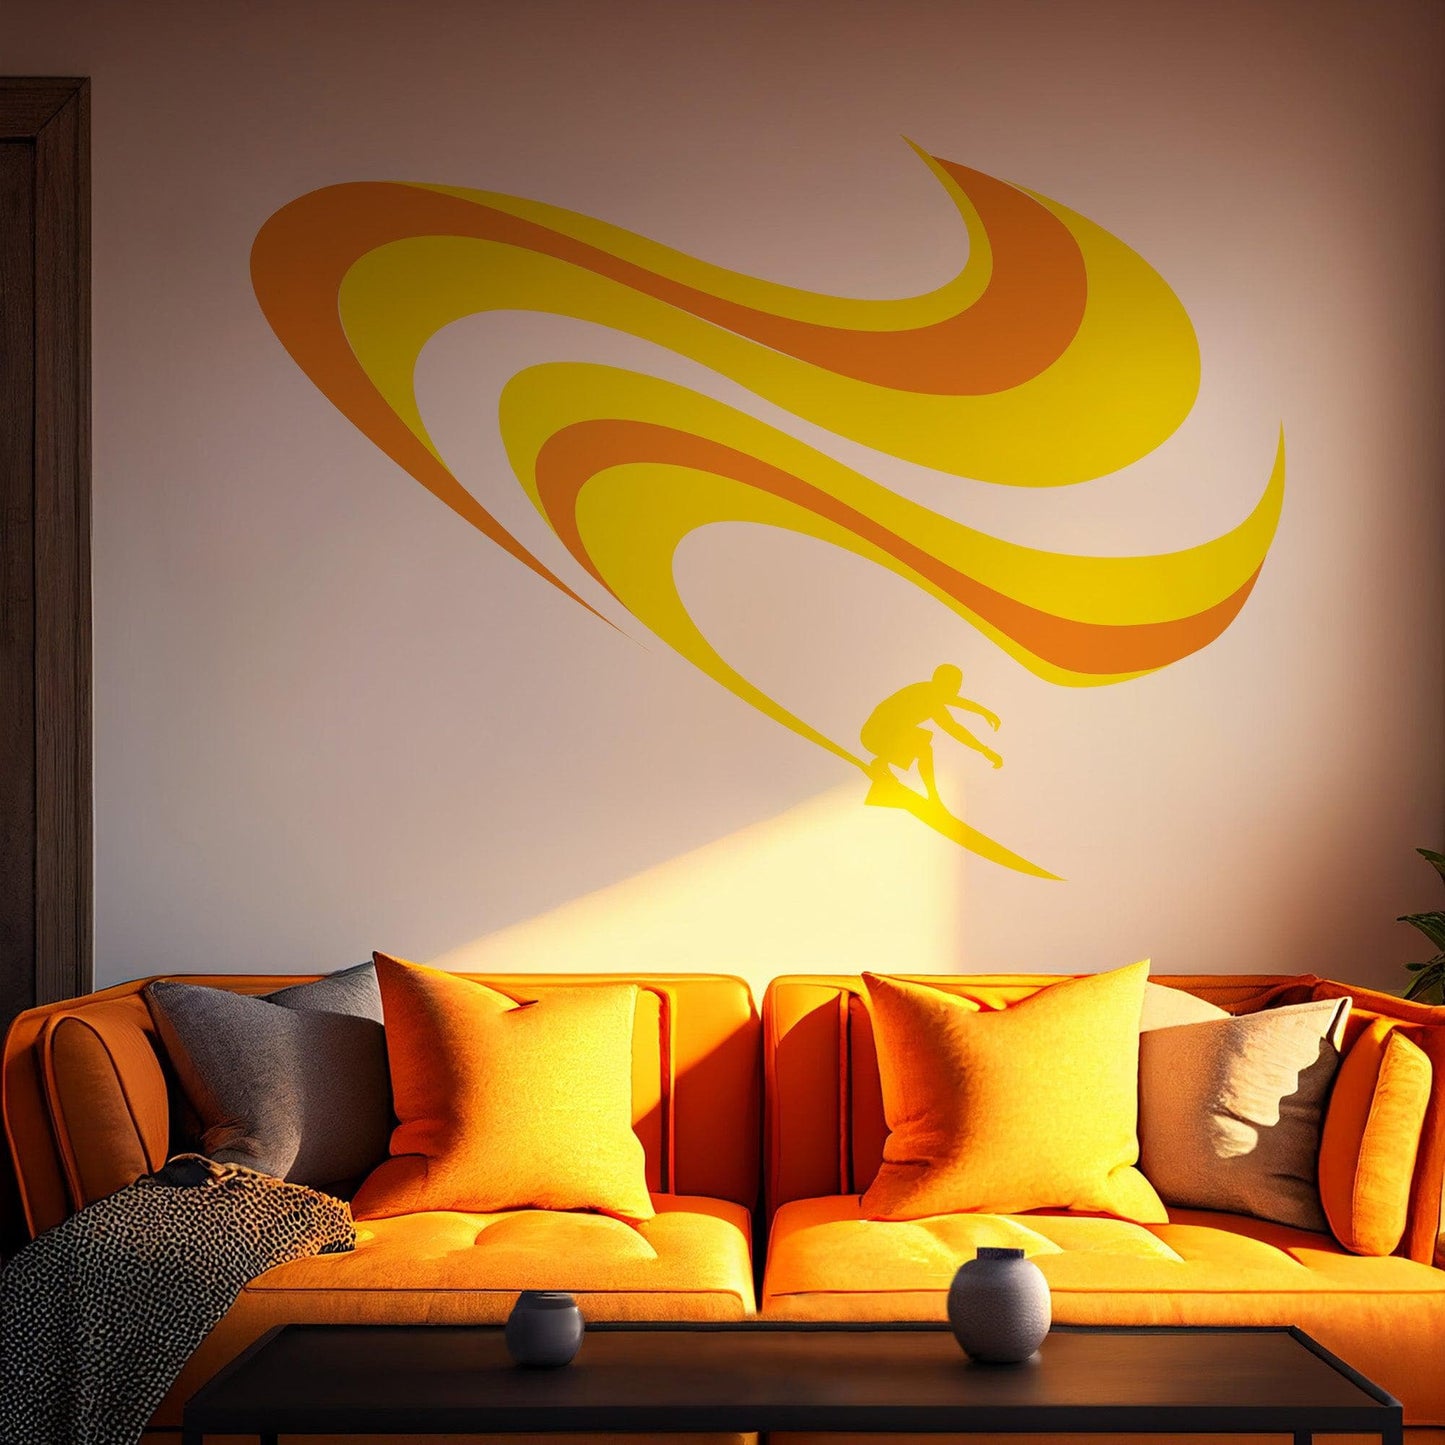 Surfing Wave Wall Decal Sticker. #277